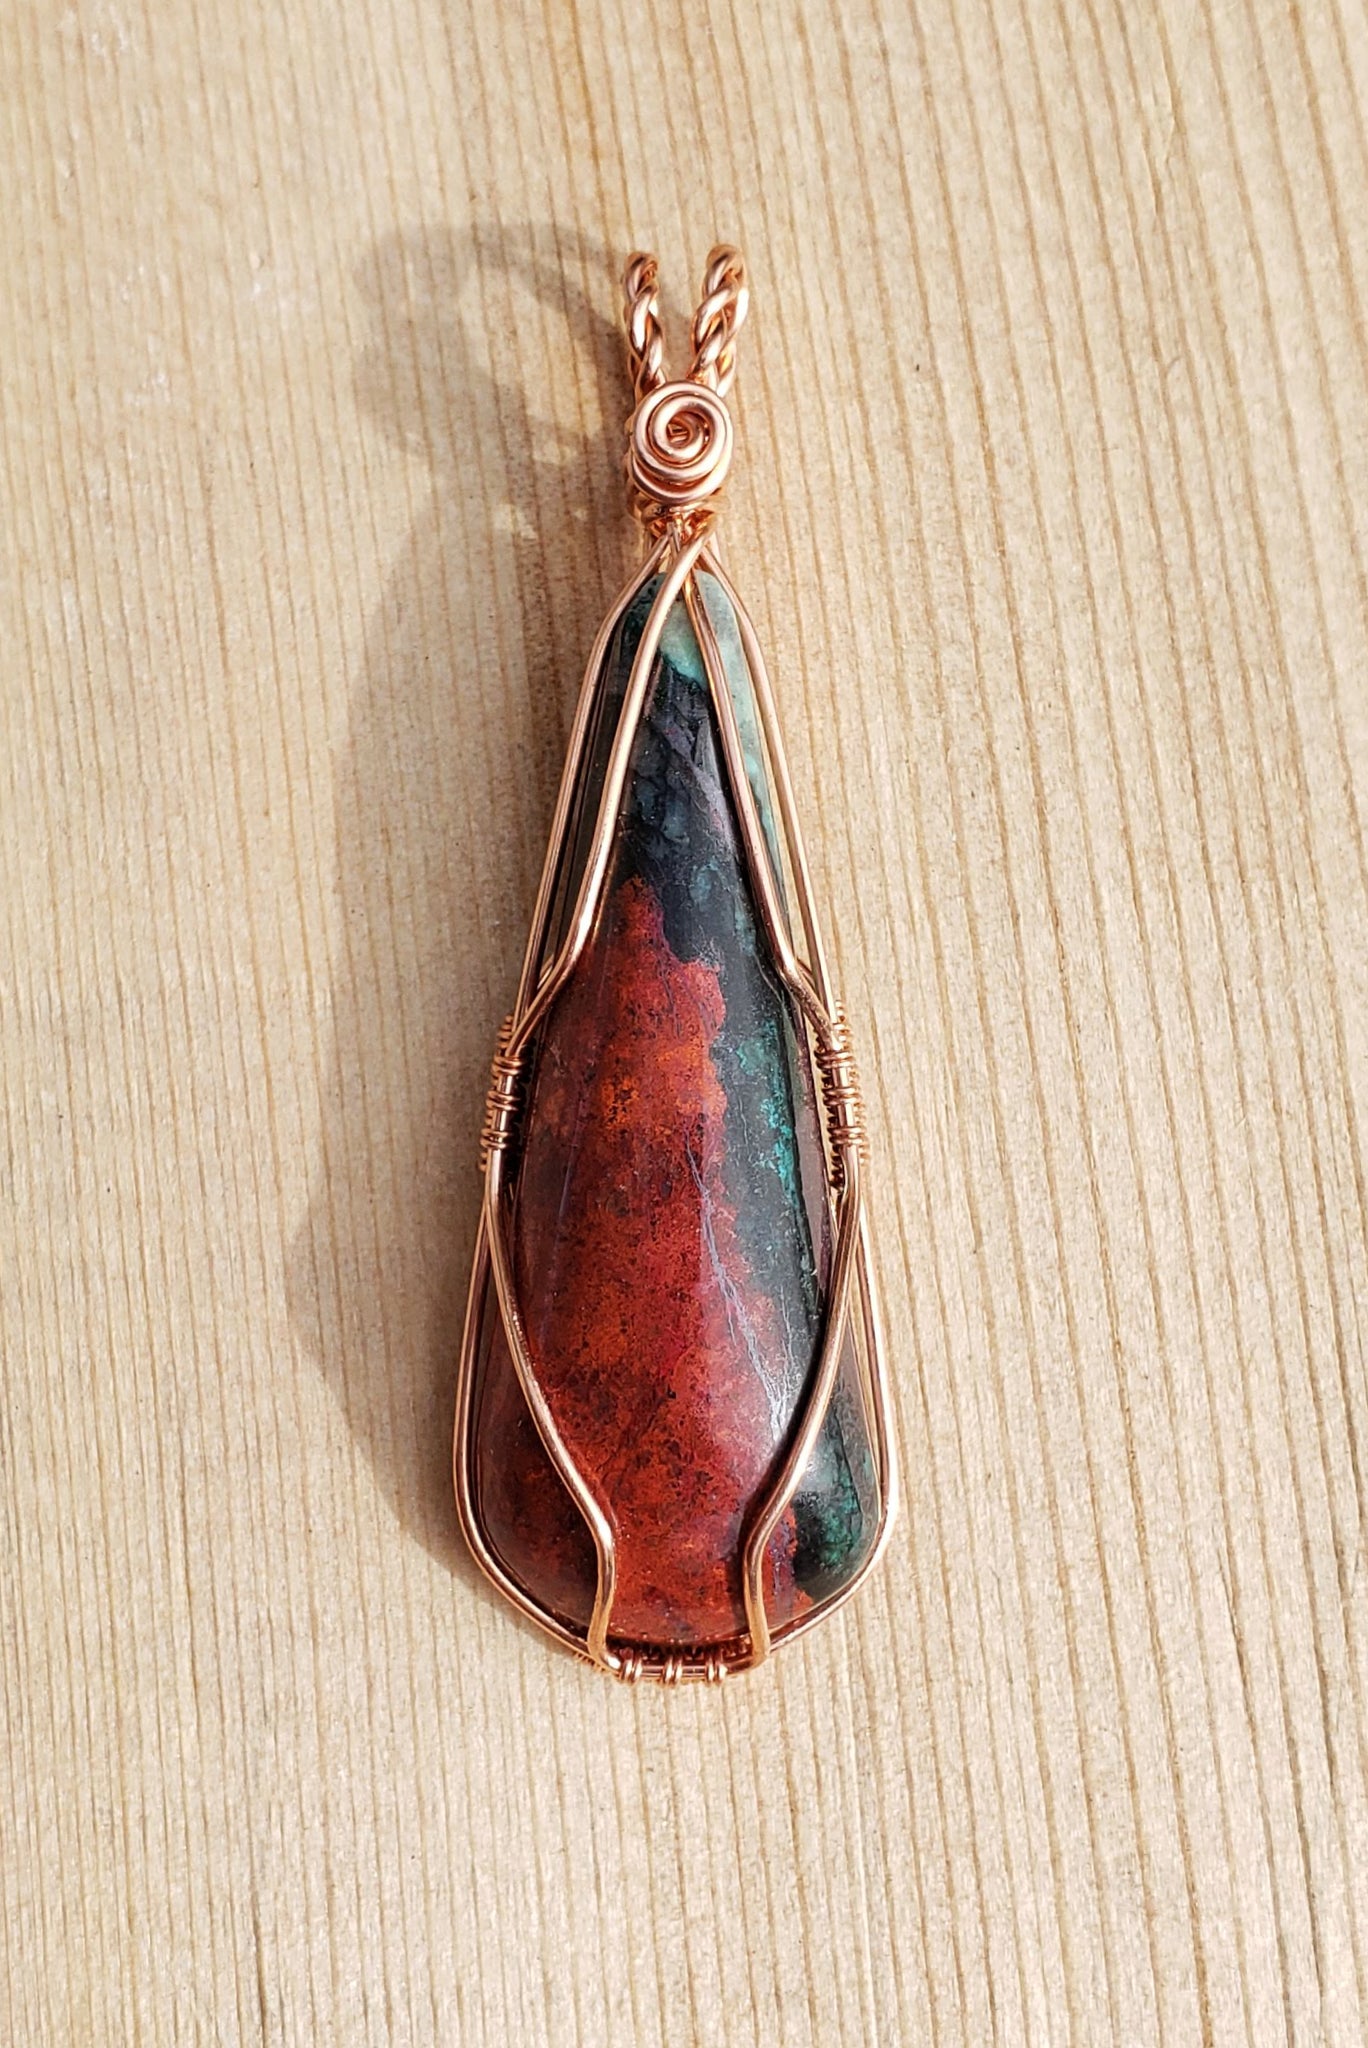 Custom Simple Copper Wire Wrapped Stone Necklace Crazy Lace Agate